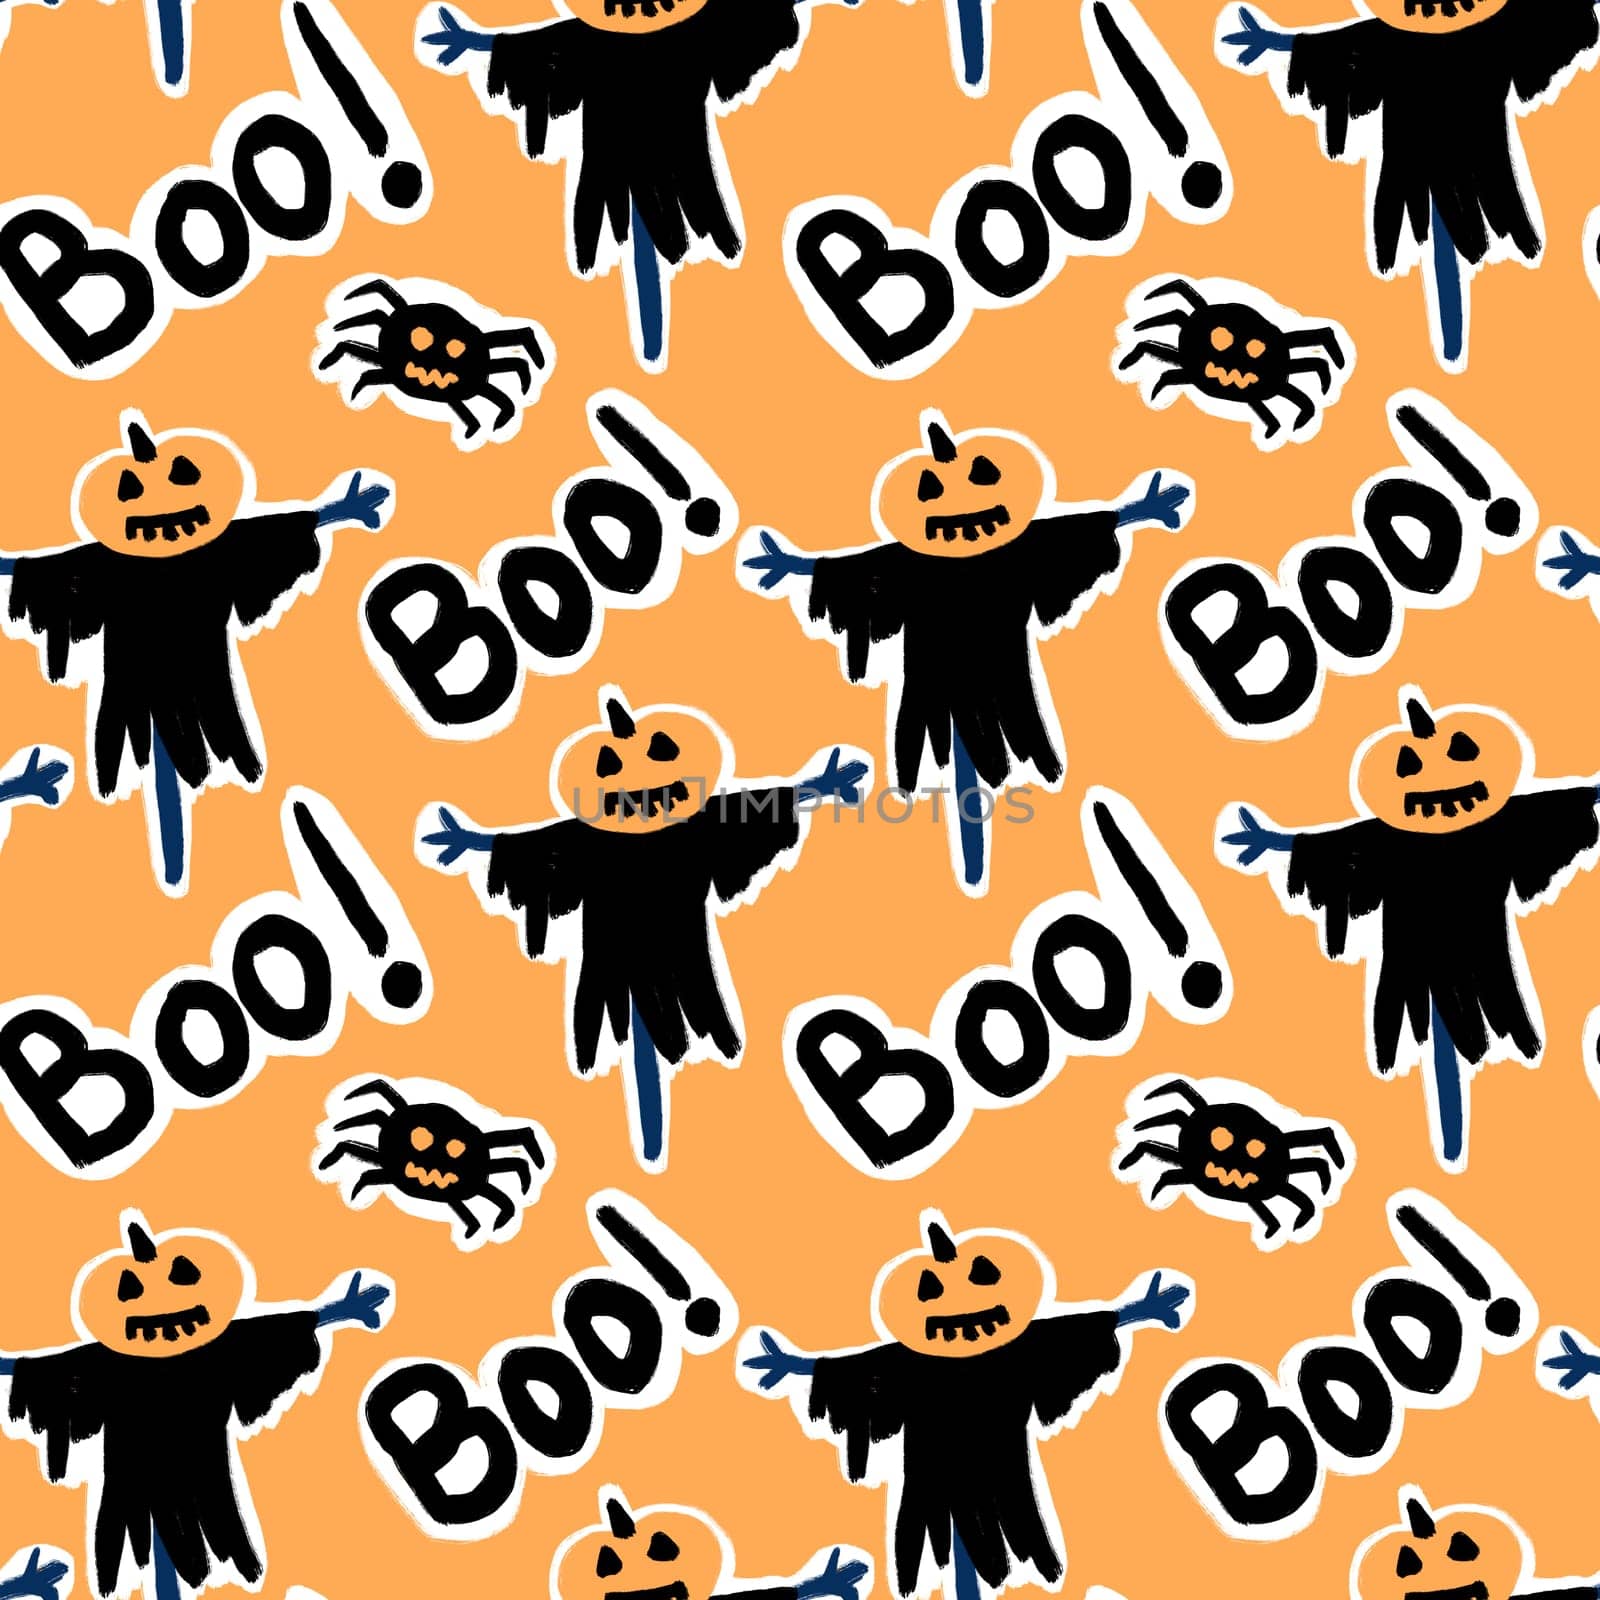 Hand drawn seamless pattern with black Halloween spider scarecrow boo on orange background. Fall autumn scary spooky horror print, cute funny kawaii season art. by Lagmar